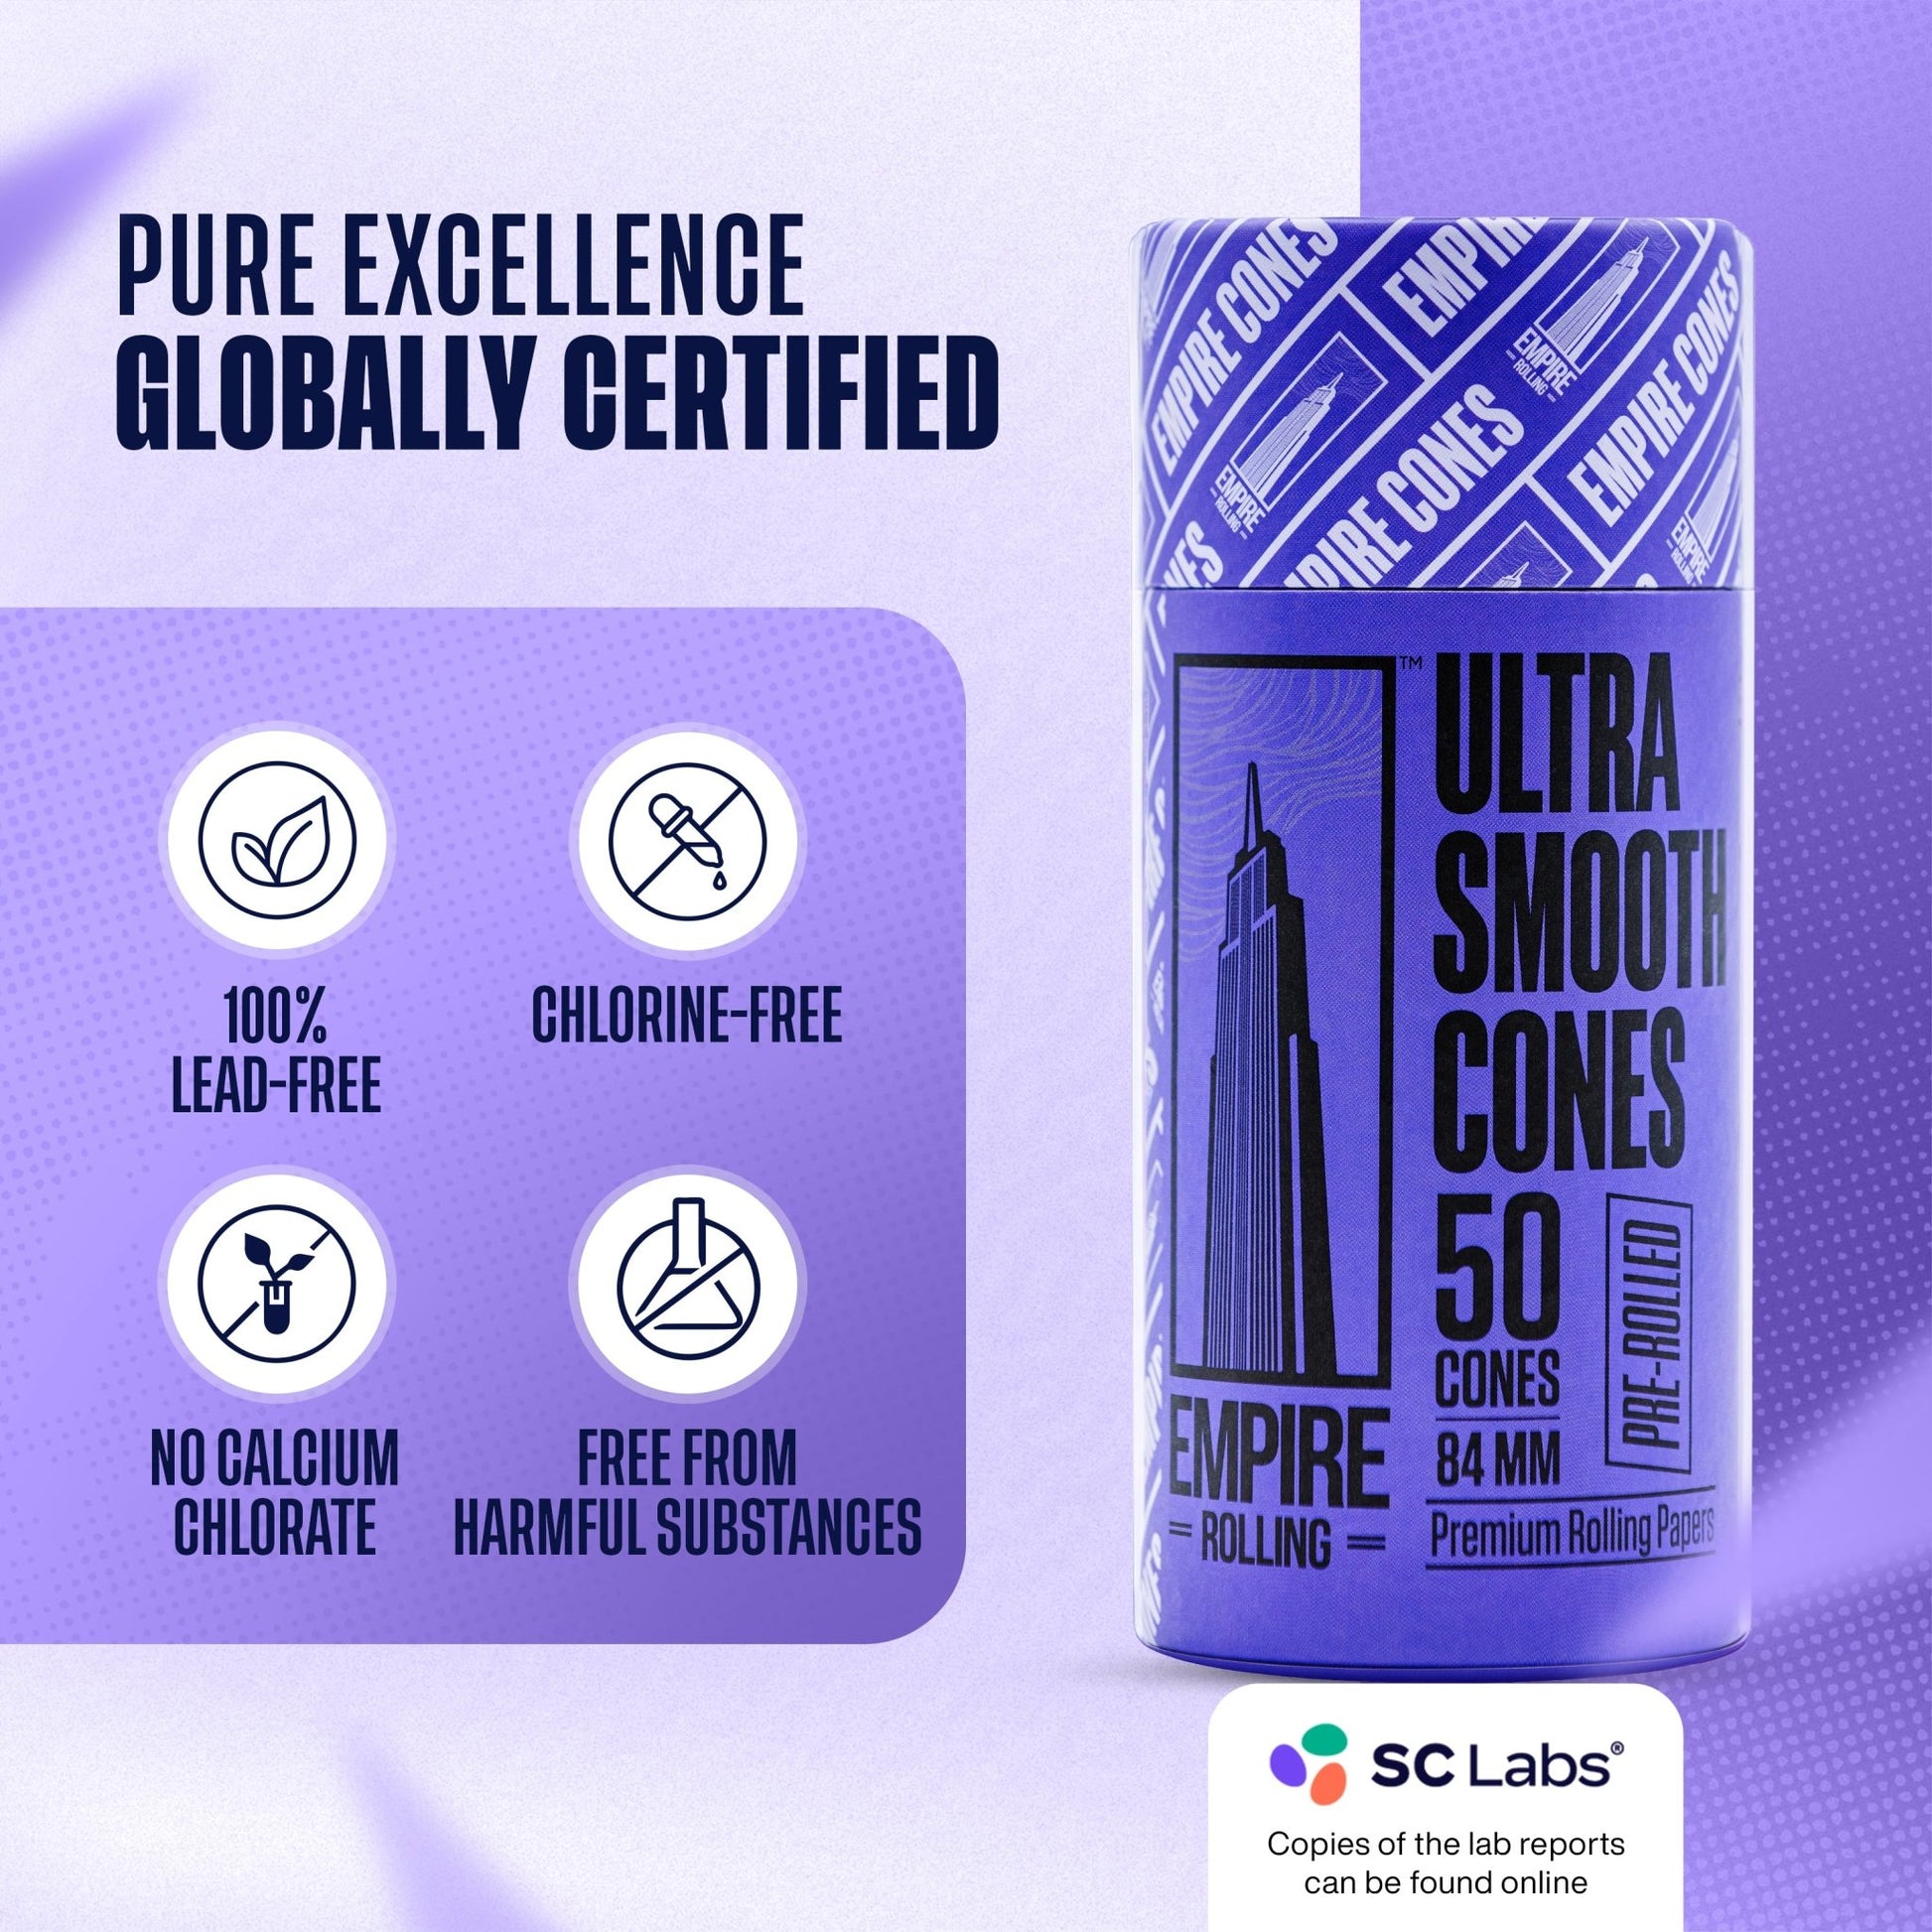 Empire Rolling's King Size Organic Hemp Rolling Papers, eco-friendly and crafted with high-quality, natural materials for a premium smoking experience.Ultra Smooth Purple Cones 50 Count - Empire Rolling Papers